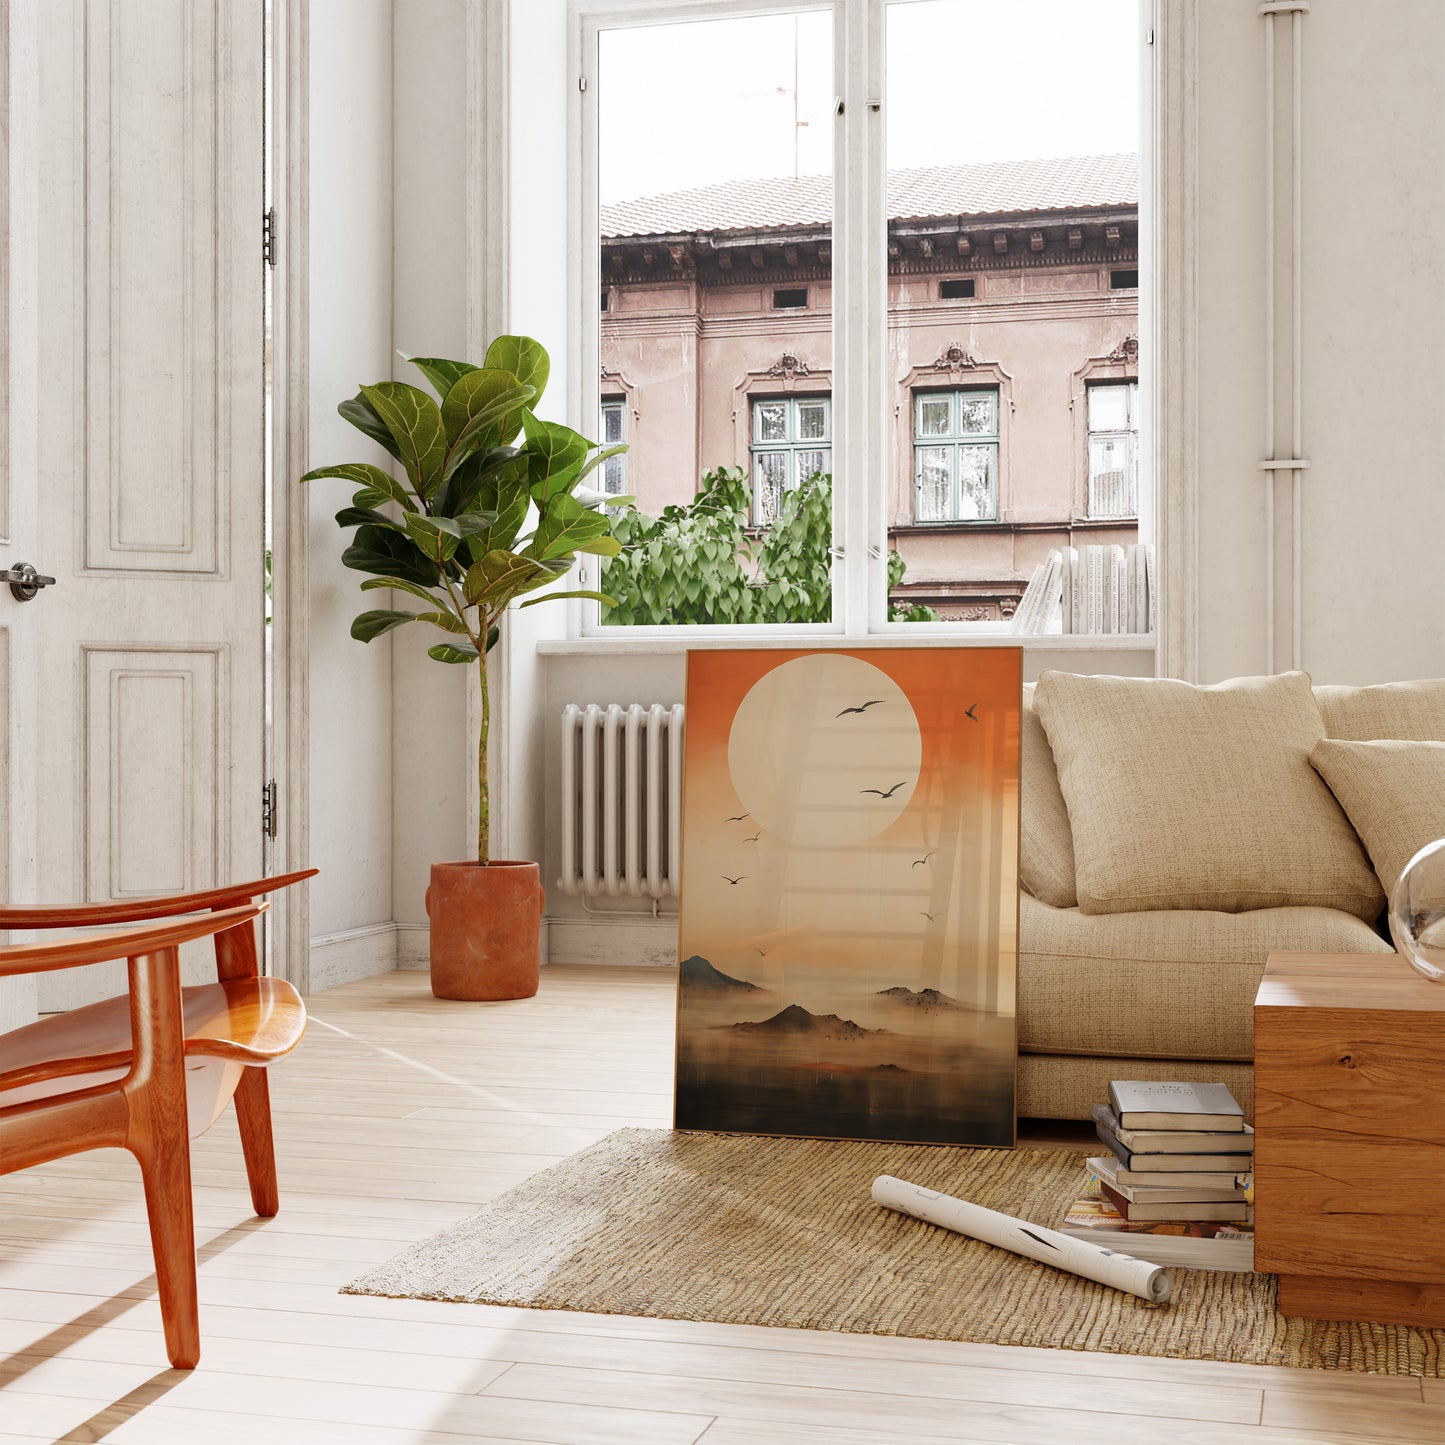 A cozy living room with a sofa, plants, and a scenic painting leaning against the wall.